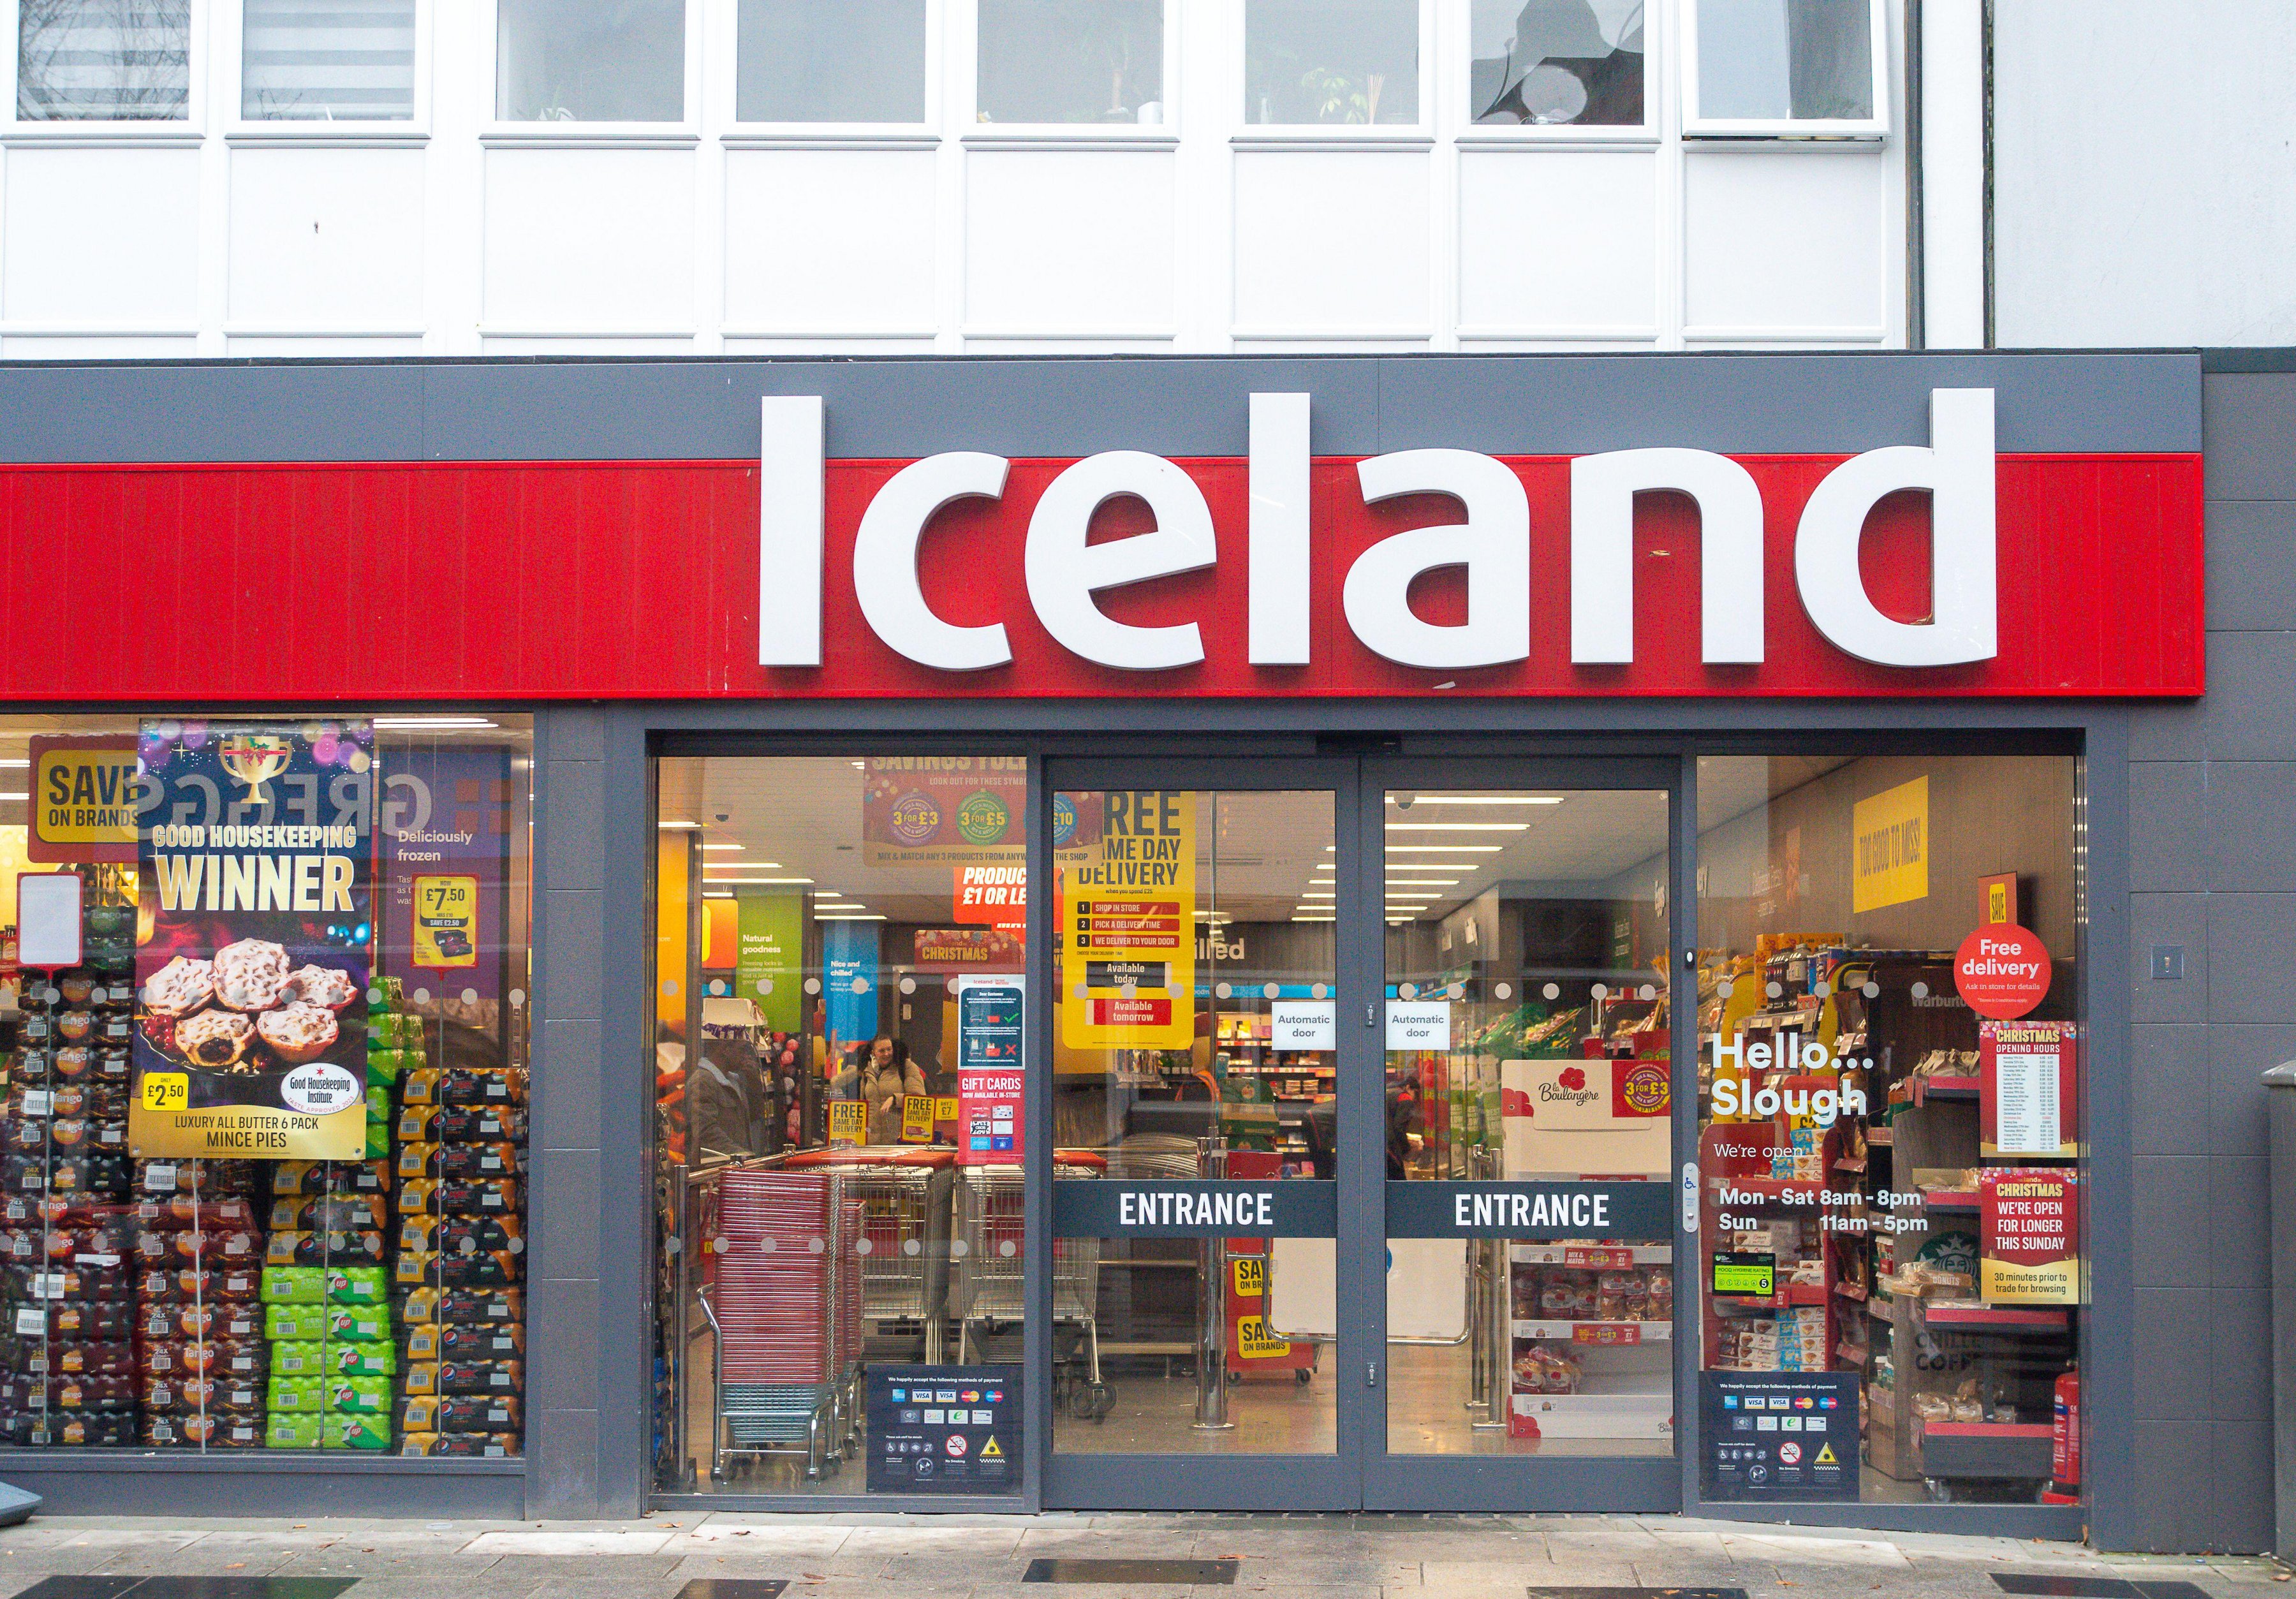 Frustrated with the cruel comments, Iceland worker Adam decided to hit back at trolls